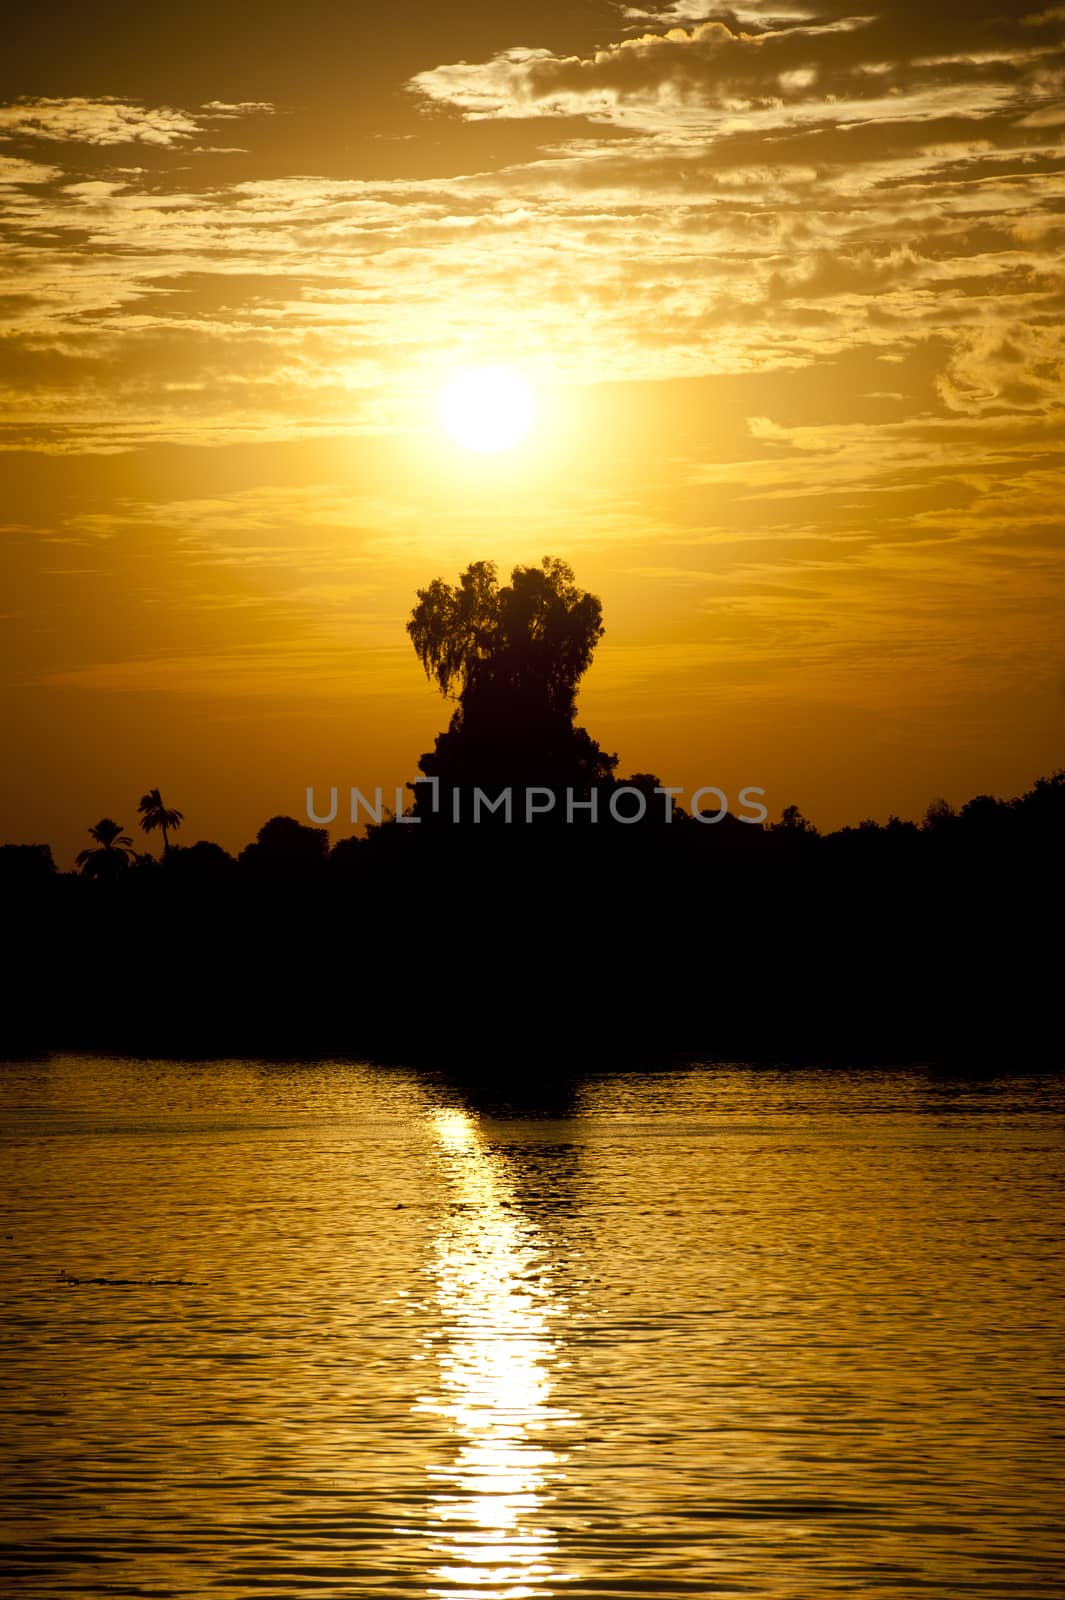 Beautiful sunset over a large river with a tree-lined river bank and reflection in the water